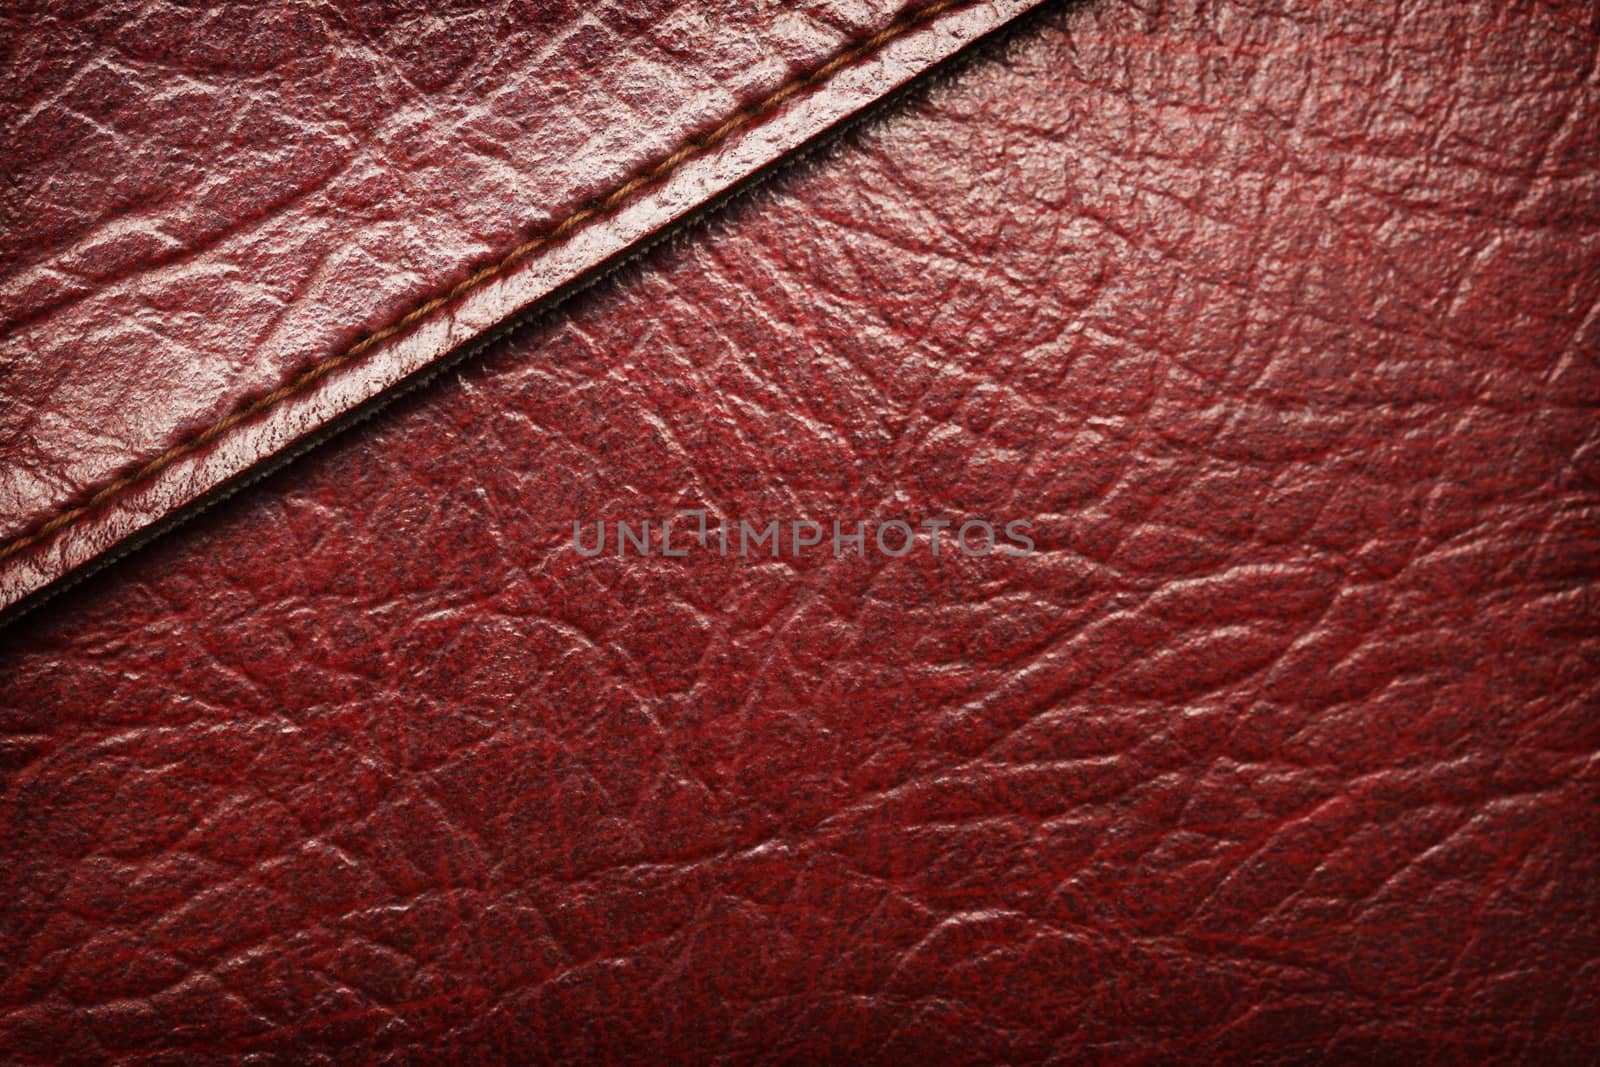 Rough leather background of old folder